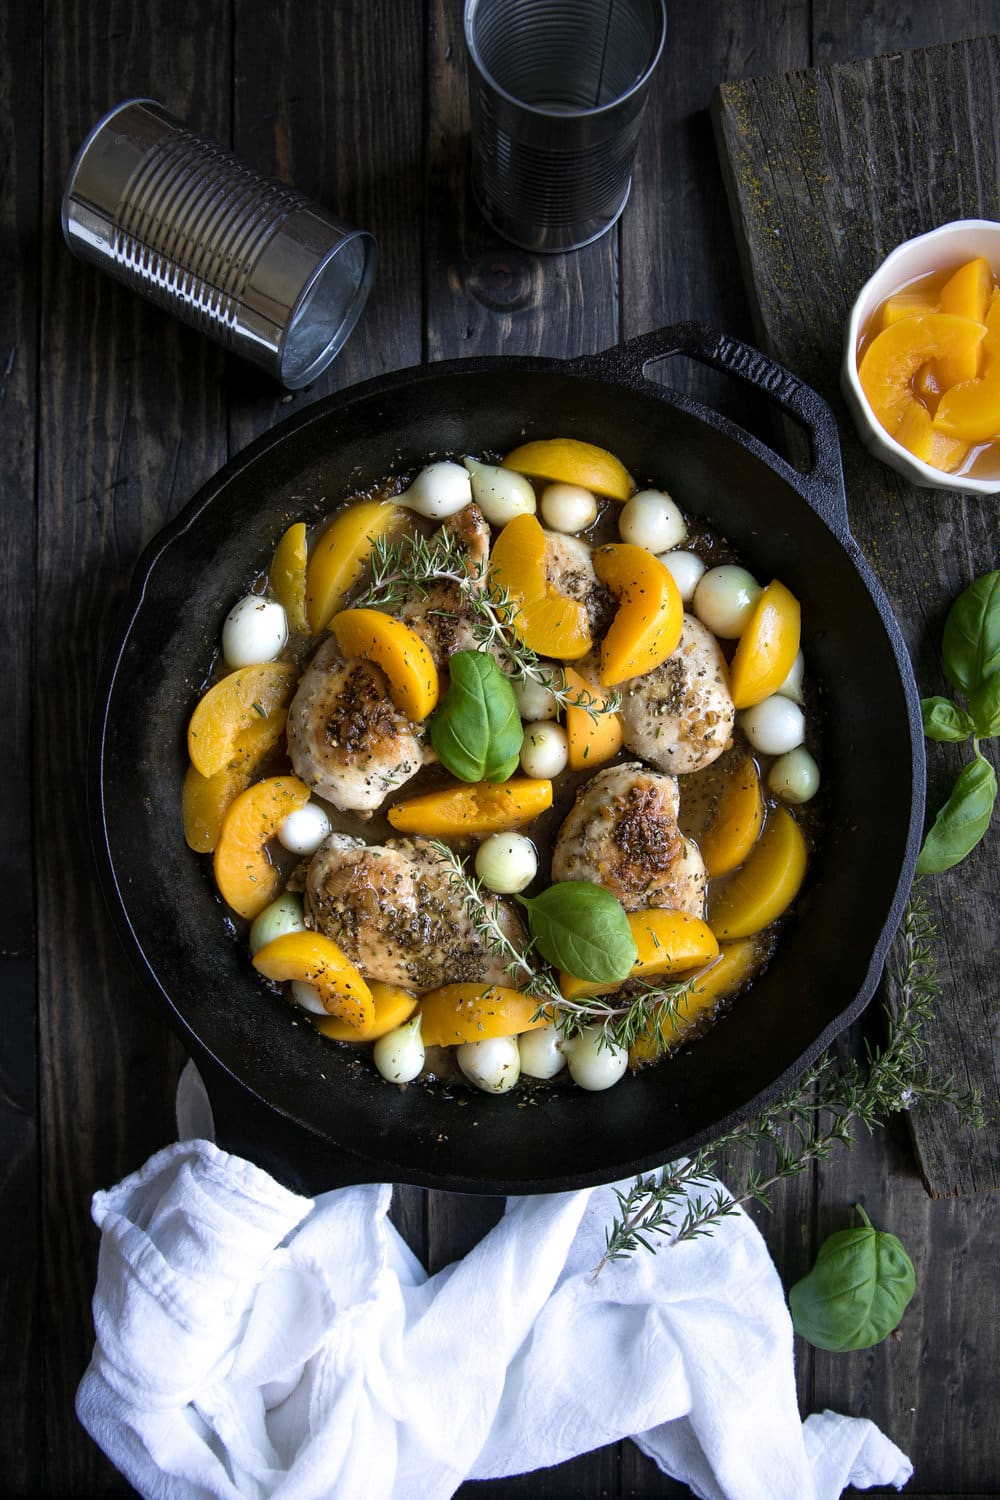 Fresh summer peaches may be on their way out, but that doesn't mean you can't enjoy them all year long in this easy, delicious and super healthy 30 Minute Peach and Chicken Skillet with Pearl Onions.